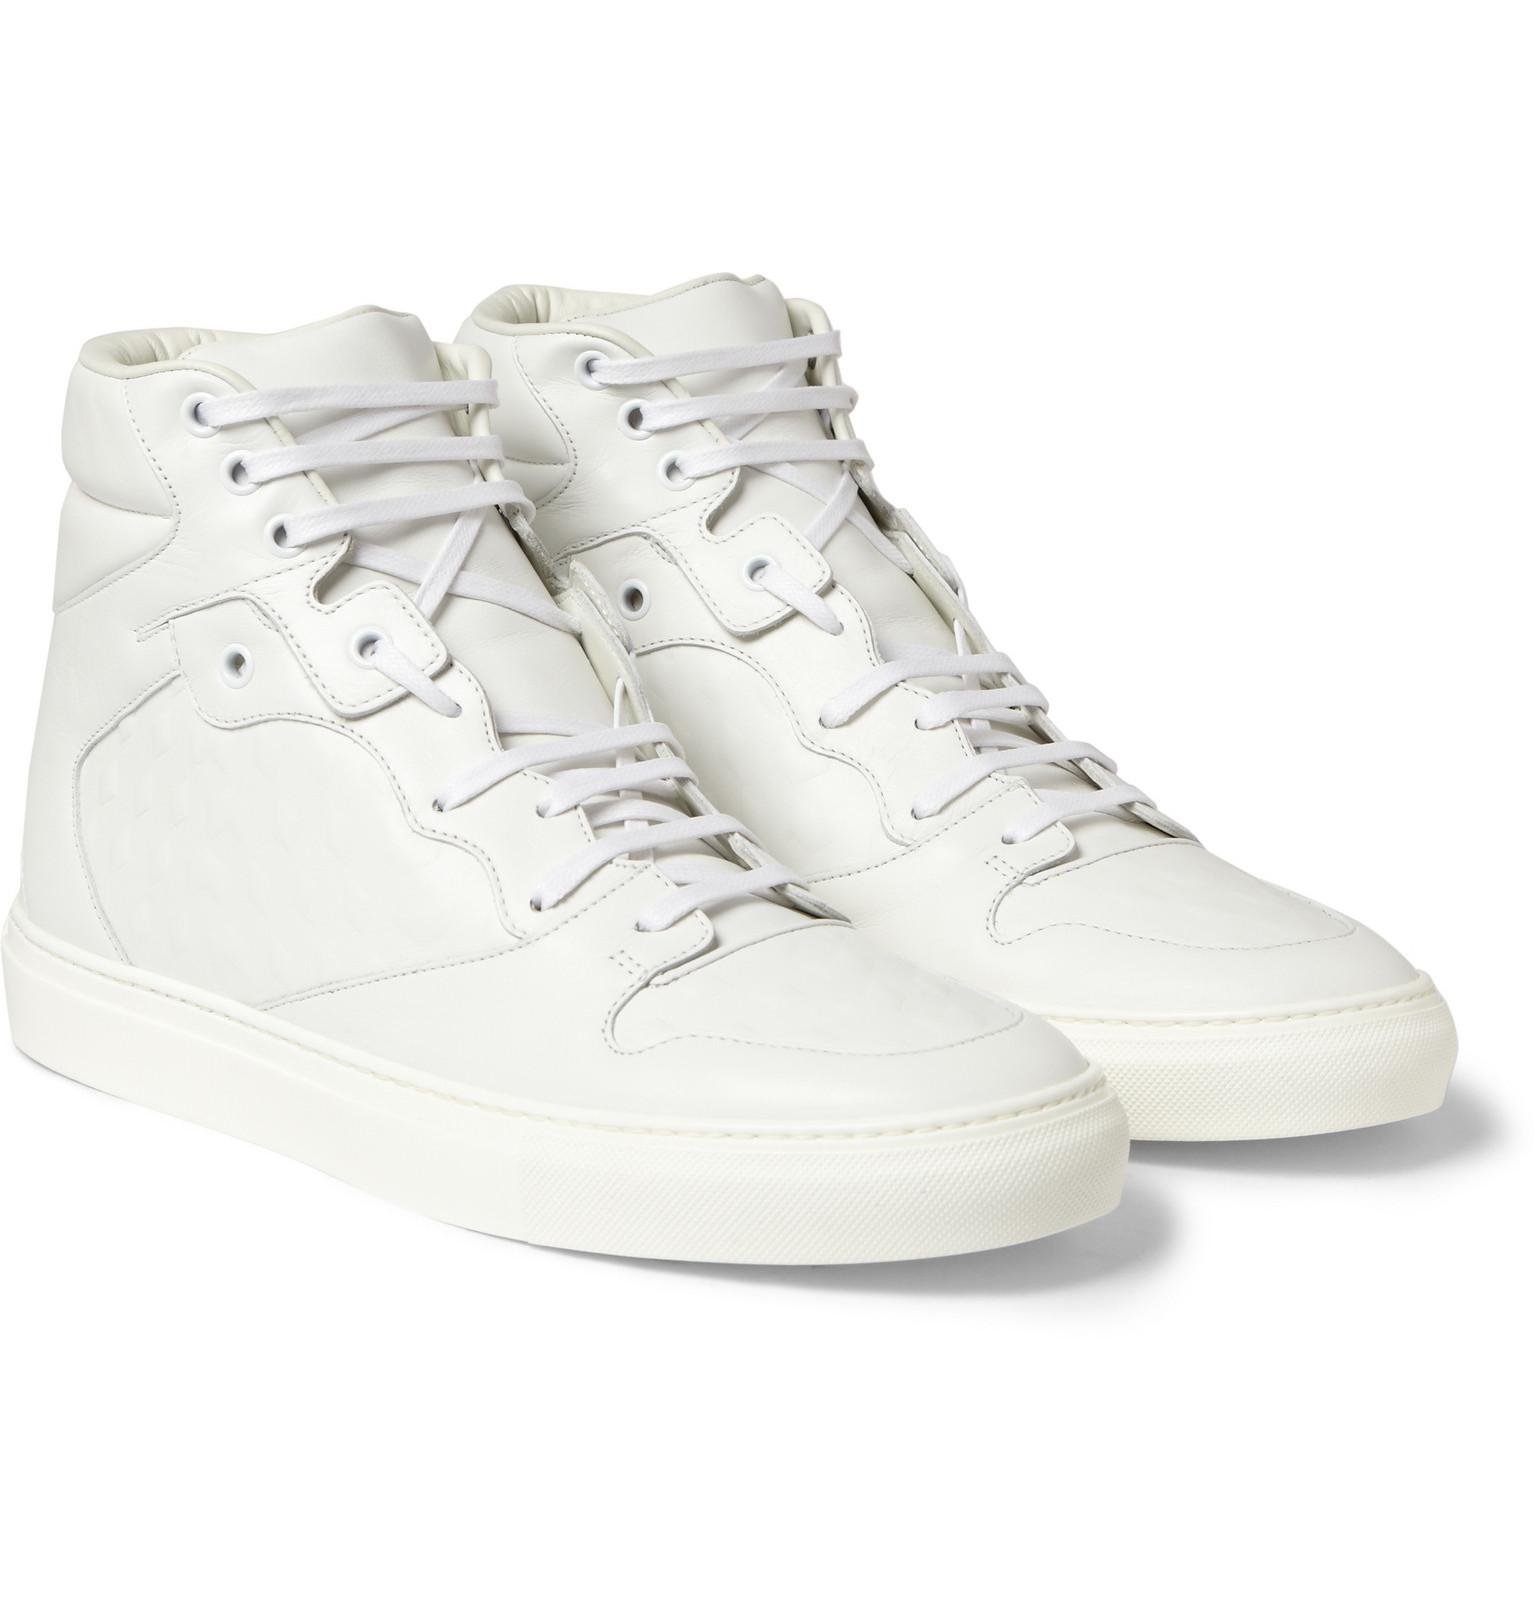 Balenciaga Embossed Leather High Top 